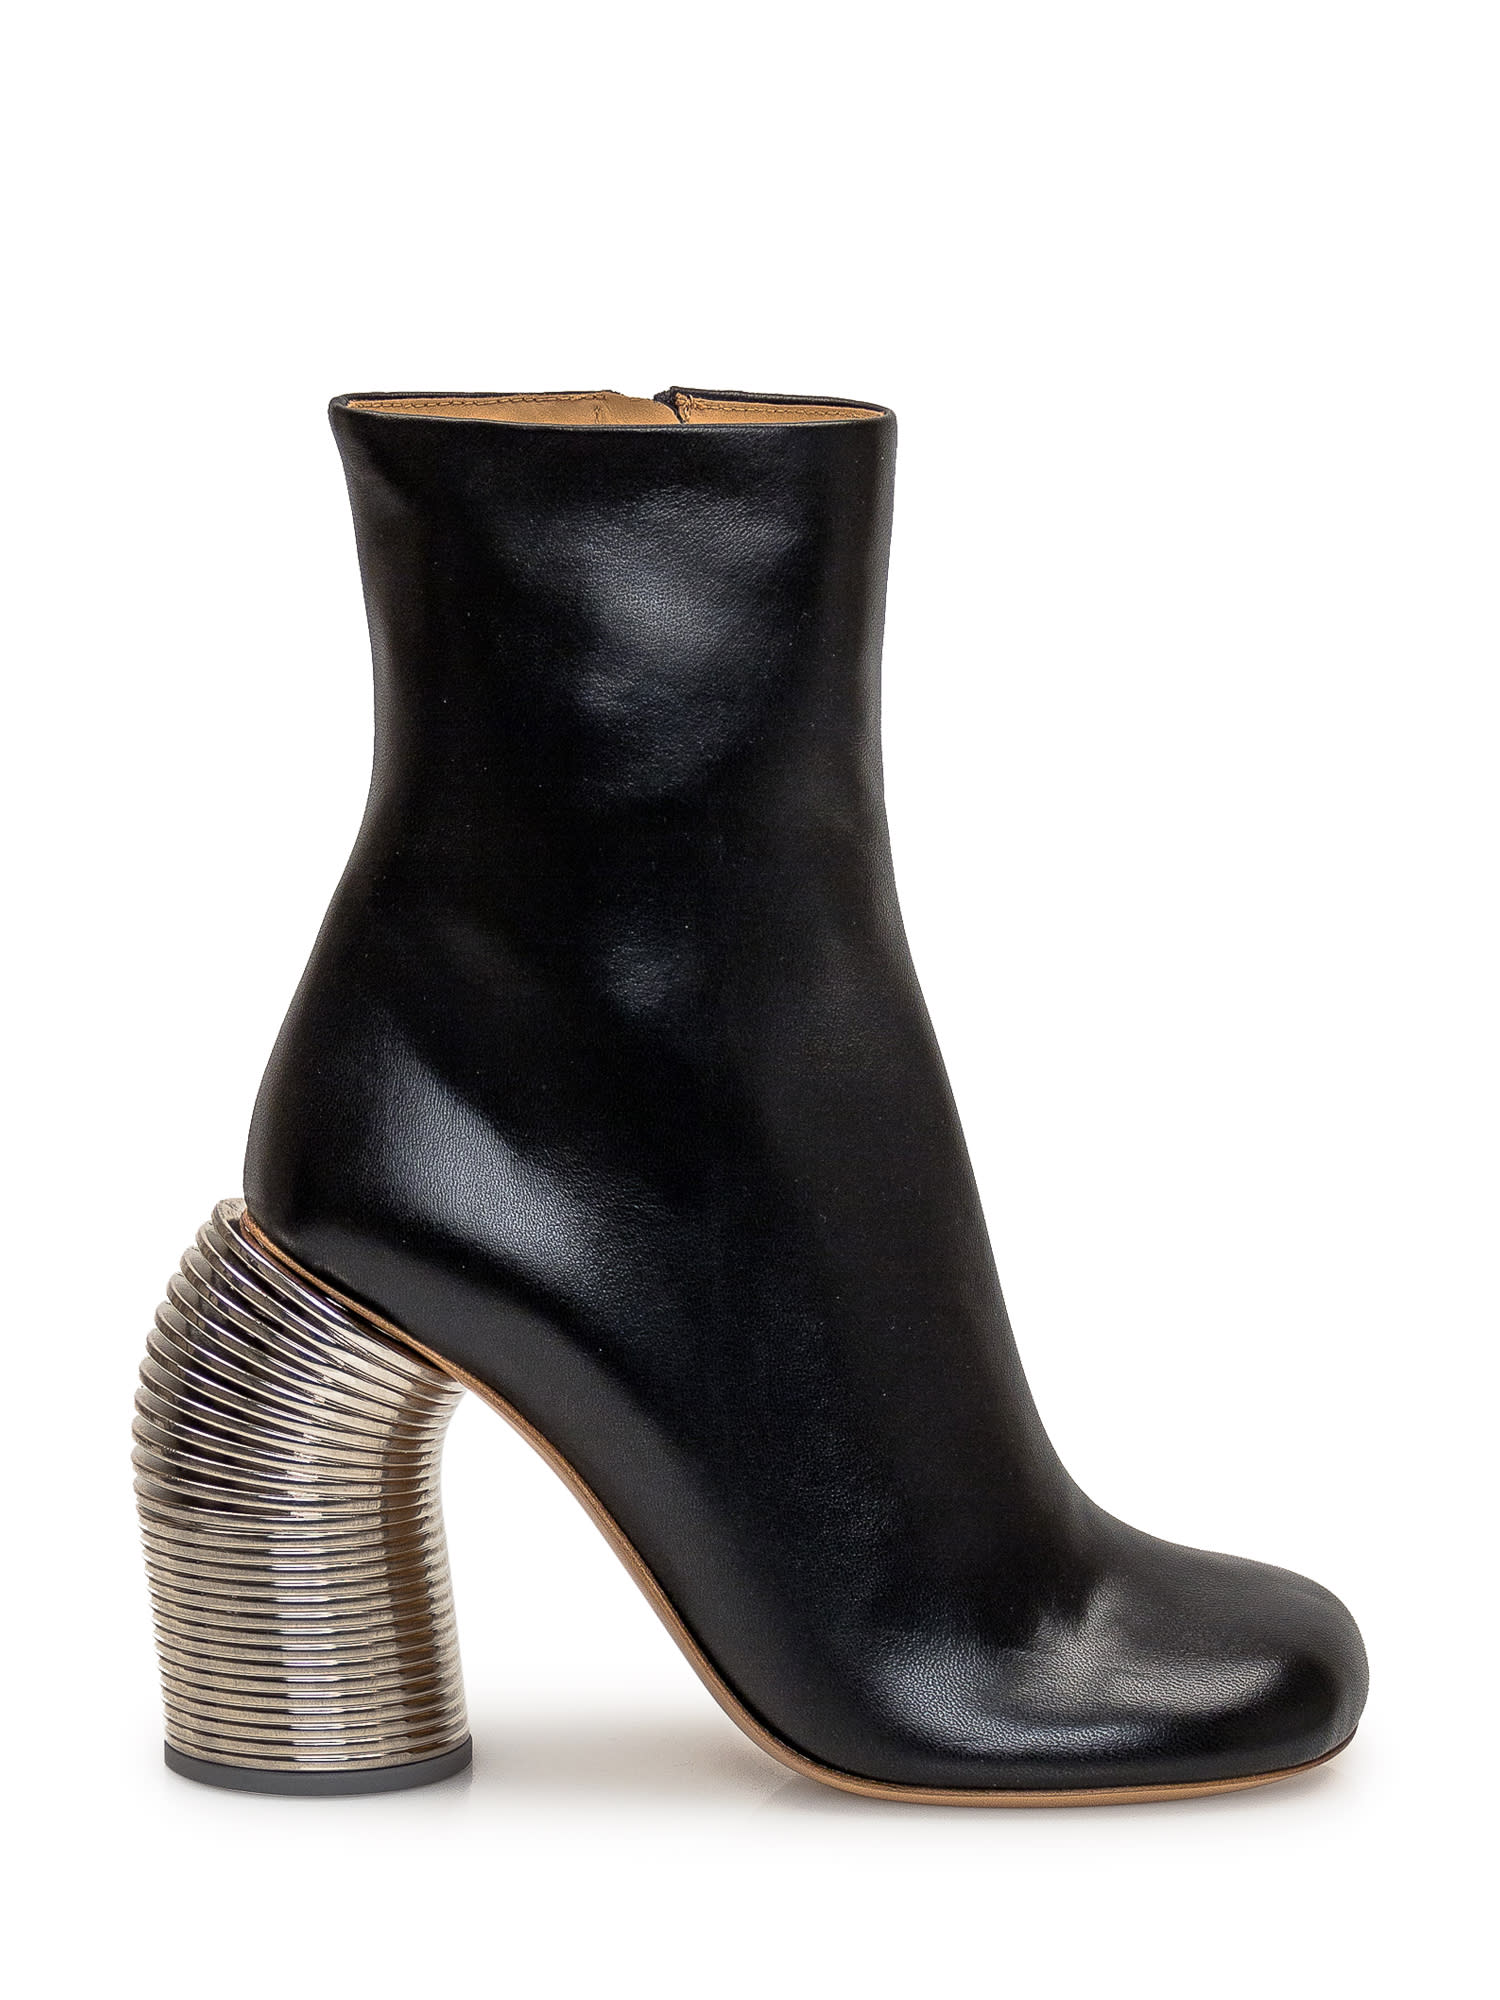 Off-White High Heels Ankle Boots In Black Leather